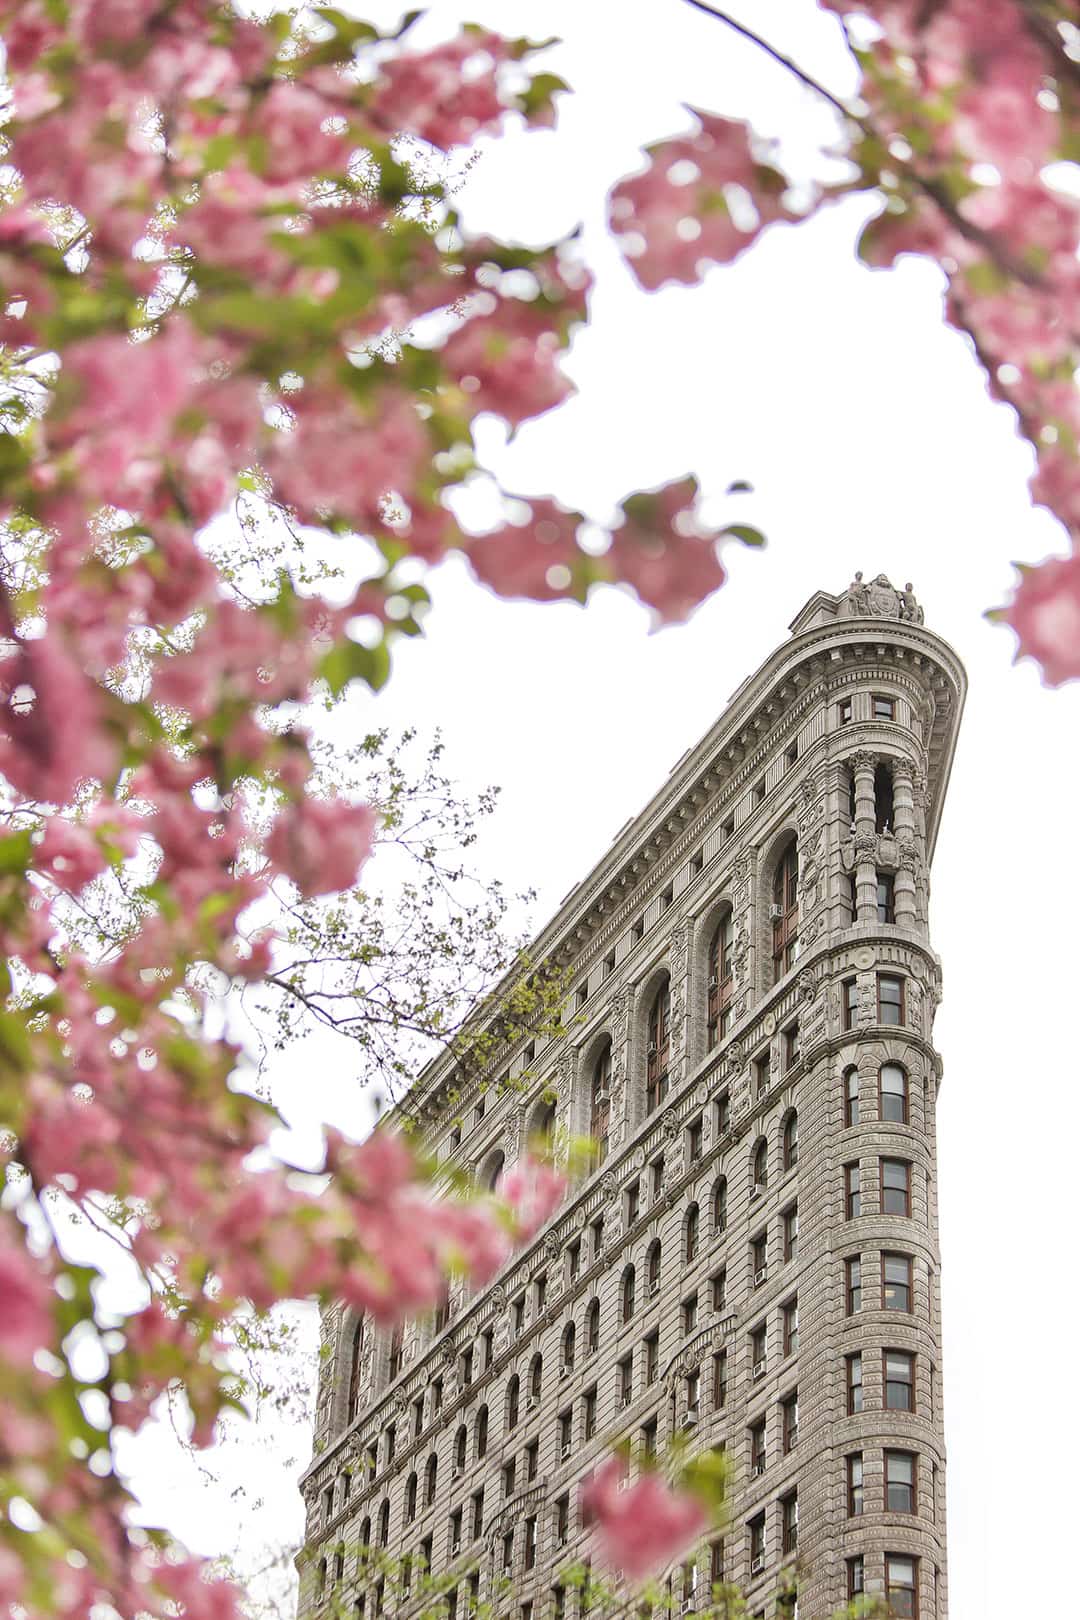 Next to the Flatiron Building is Madison Square Park, which has a few cherry blossom trees that can perfectly frame this iconic building // Local Adventurer #nyc #newyork